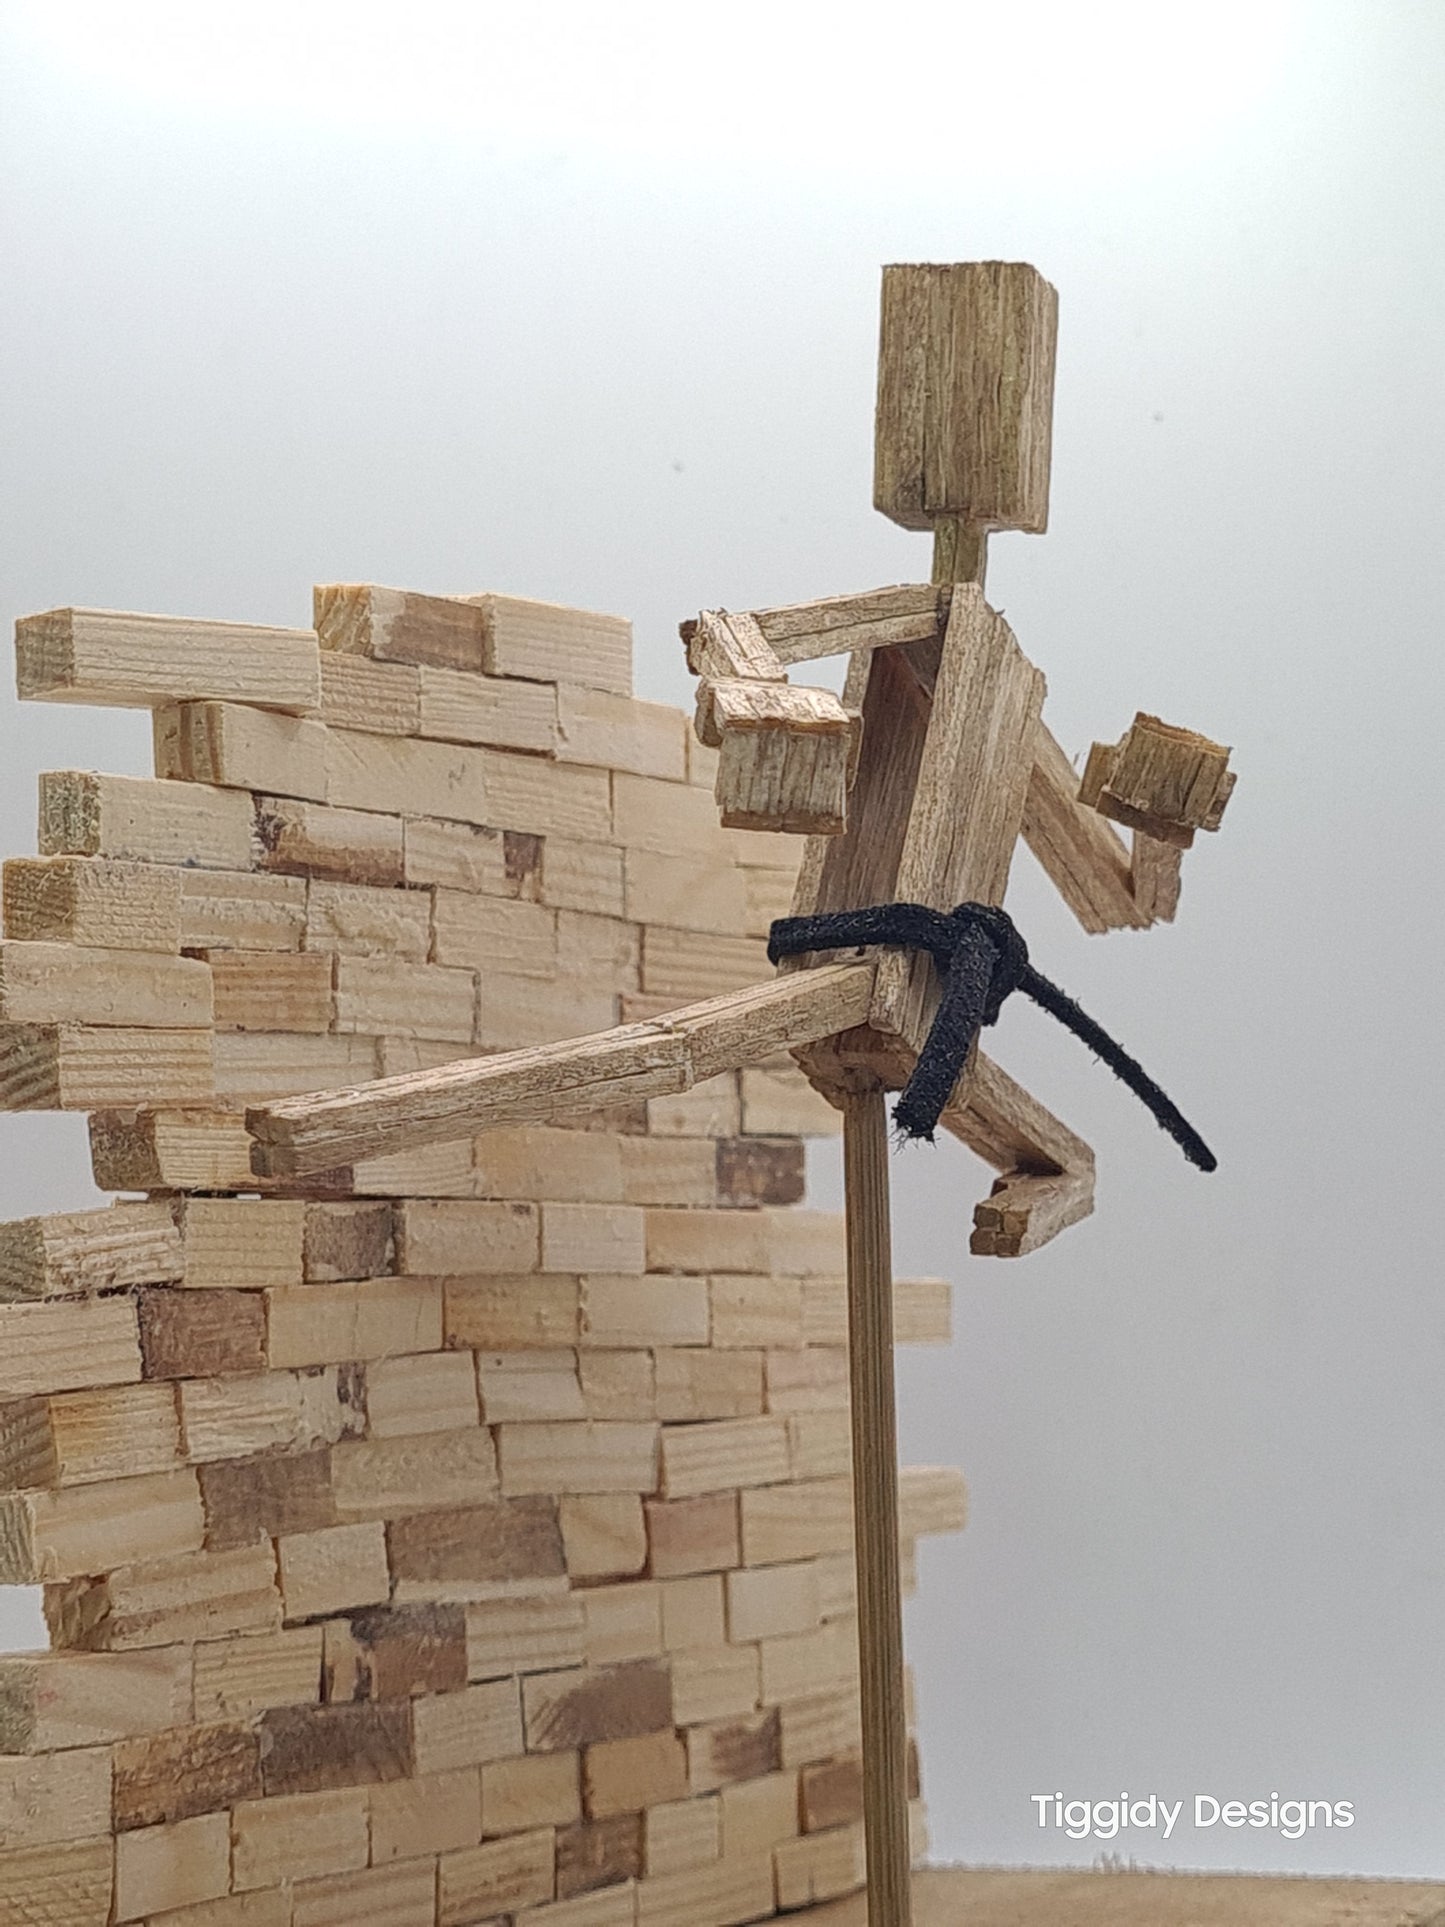 Flying Kick - Handcrafted Wooden Matchstick Figures - Gifts, Ornaments and Decor By Tiggidy Designs